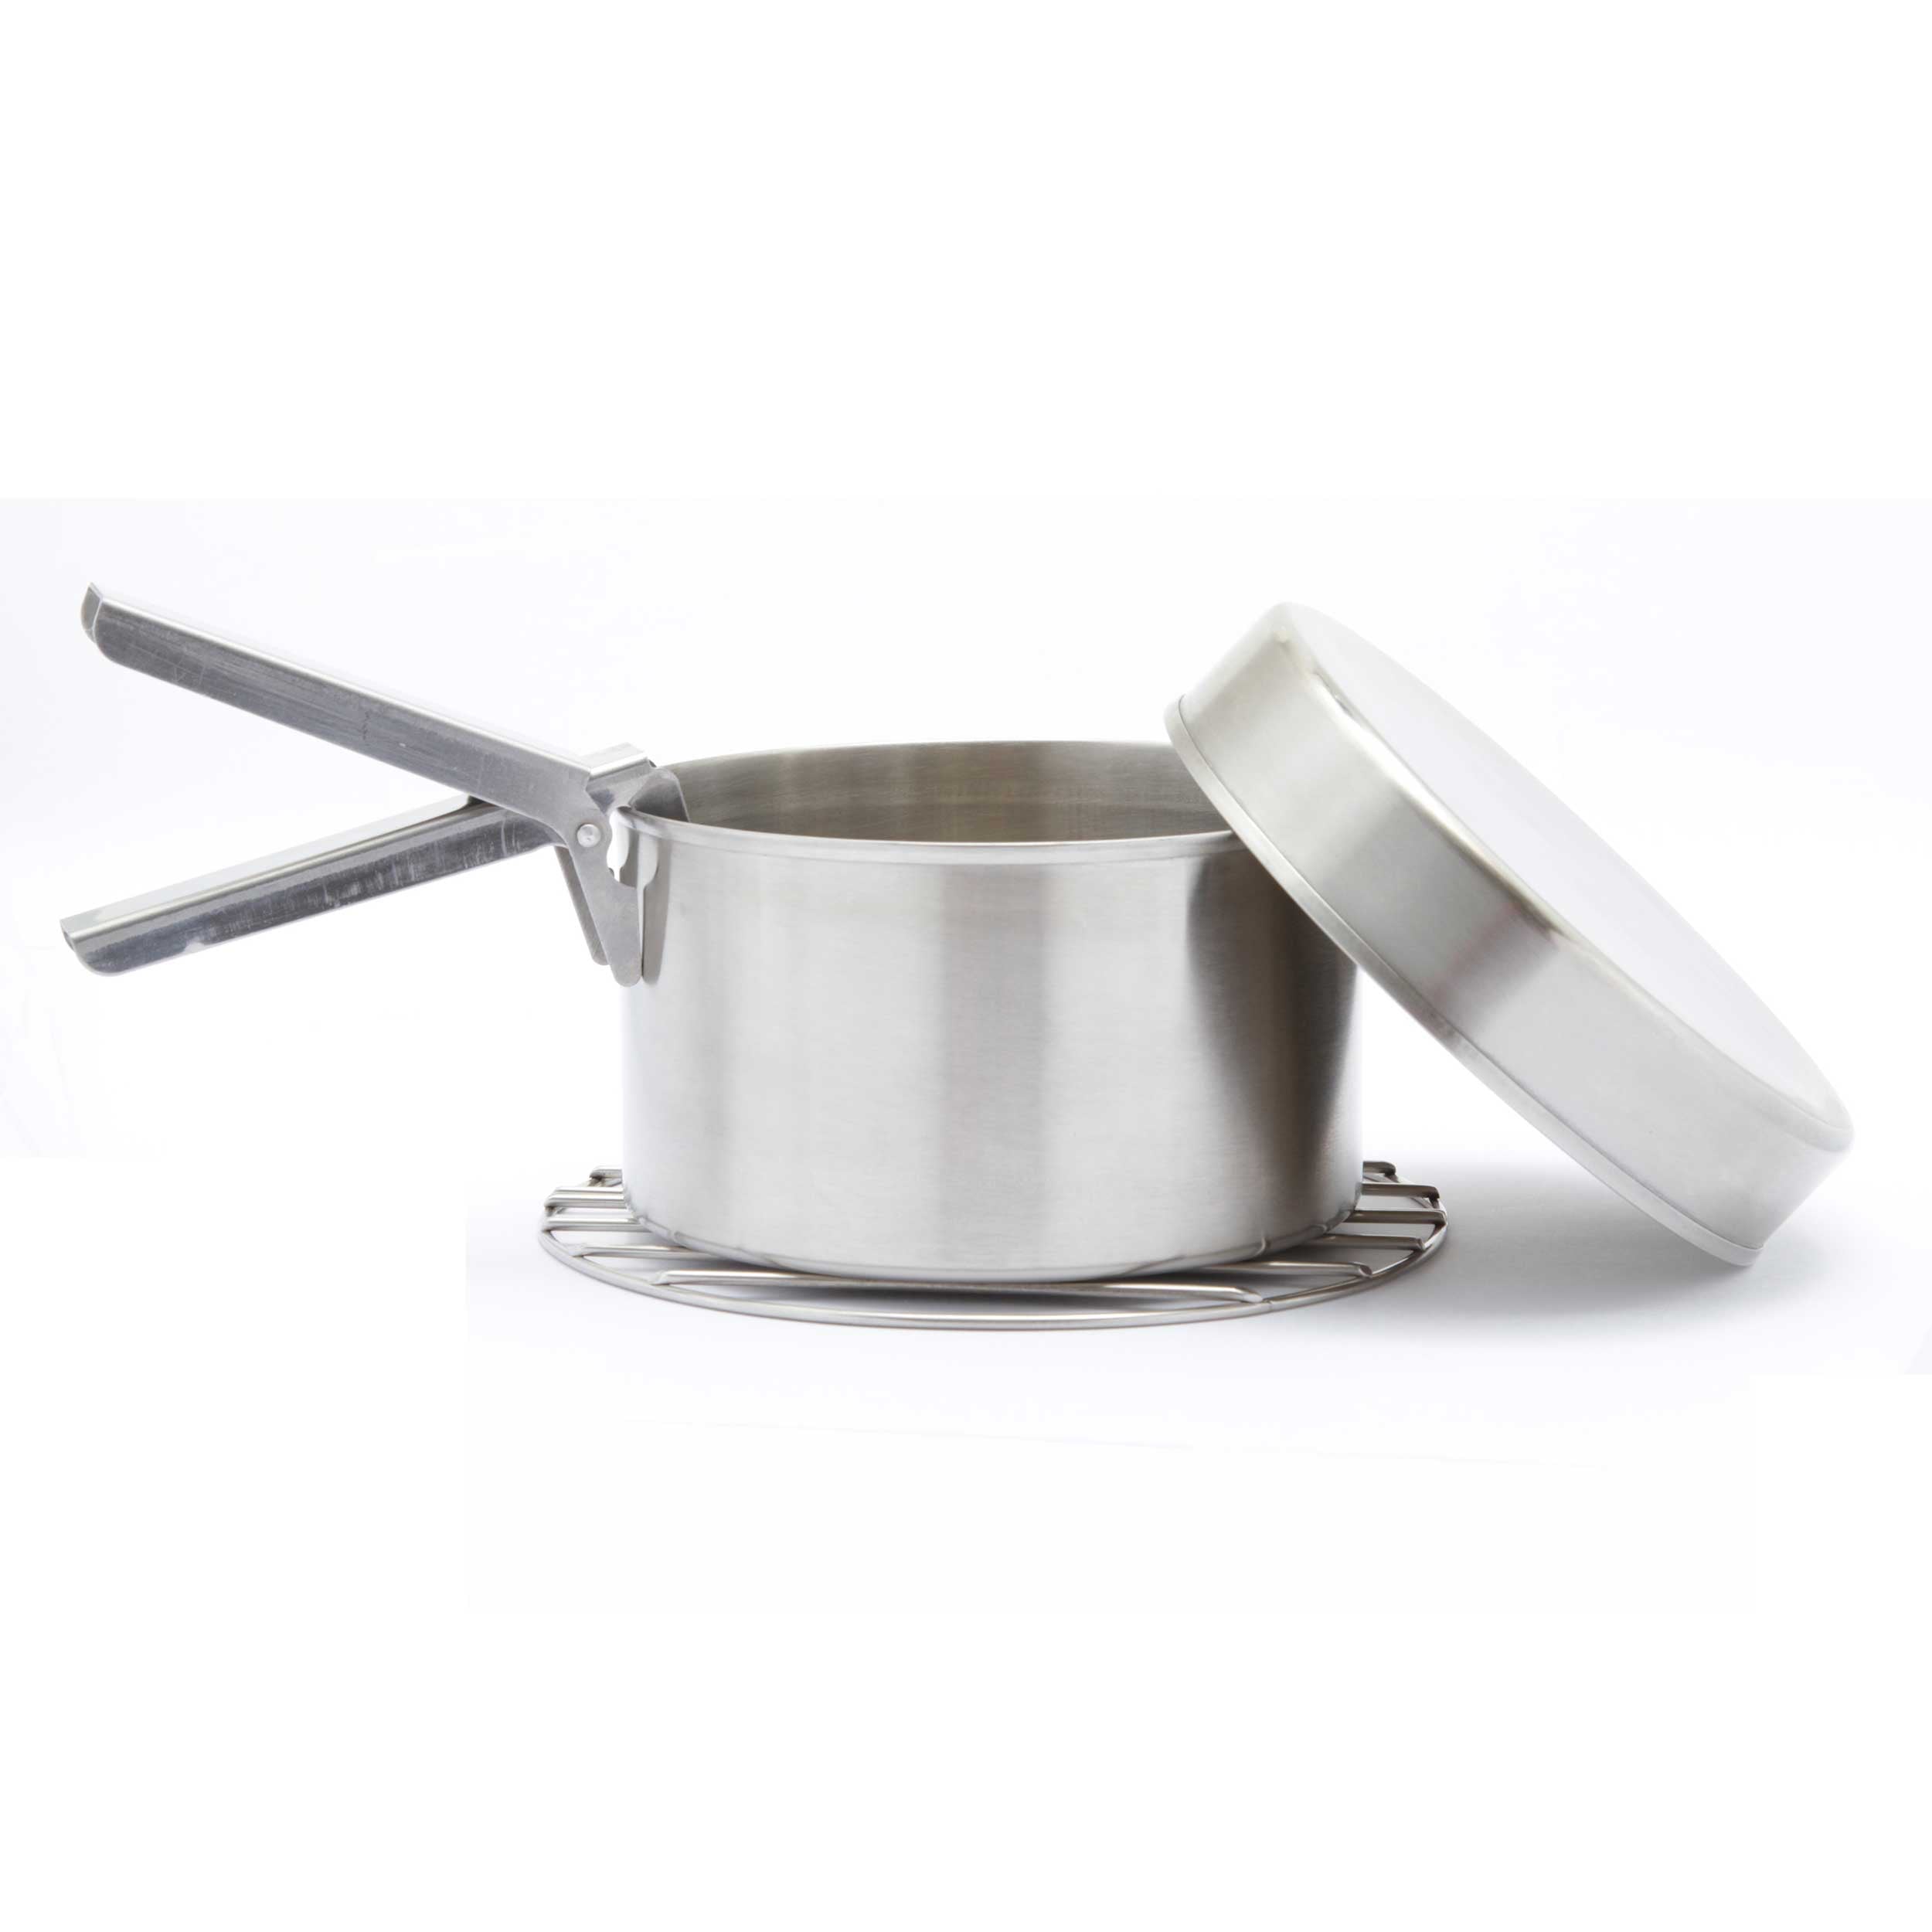 KELLY KETTLE COOK SET SMALL / ケリーケトル クックセット 小 │ UPI 